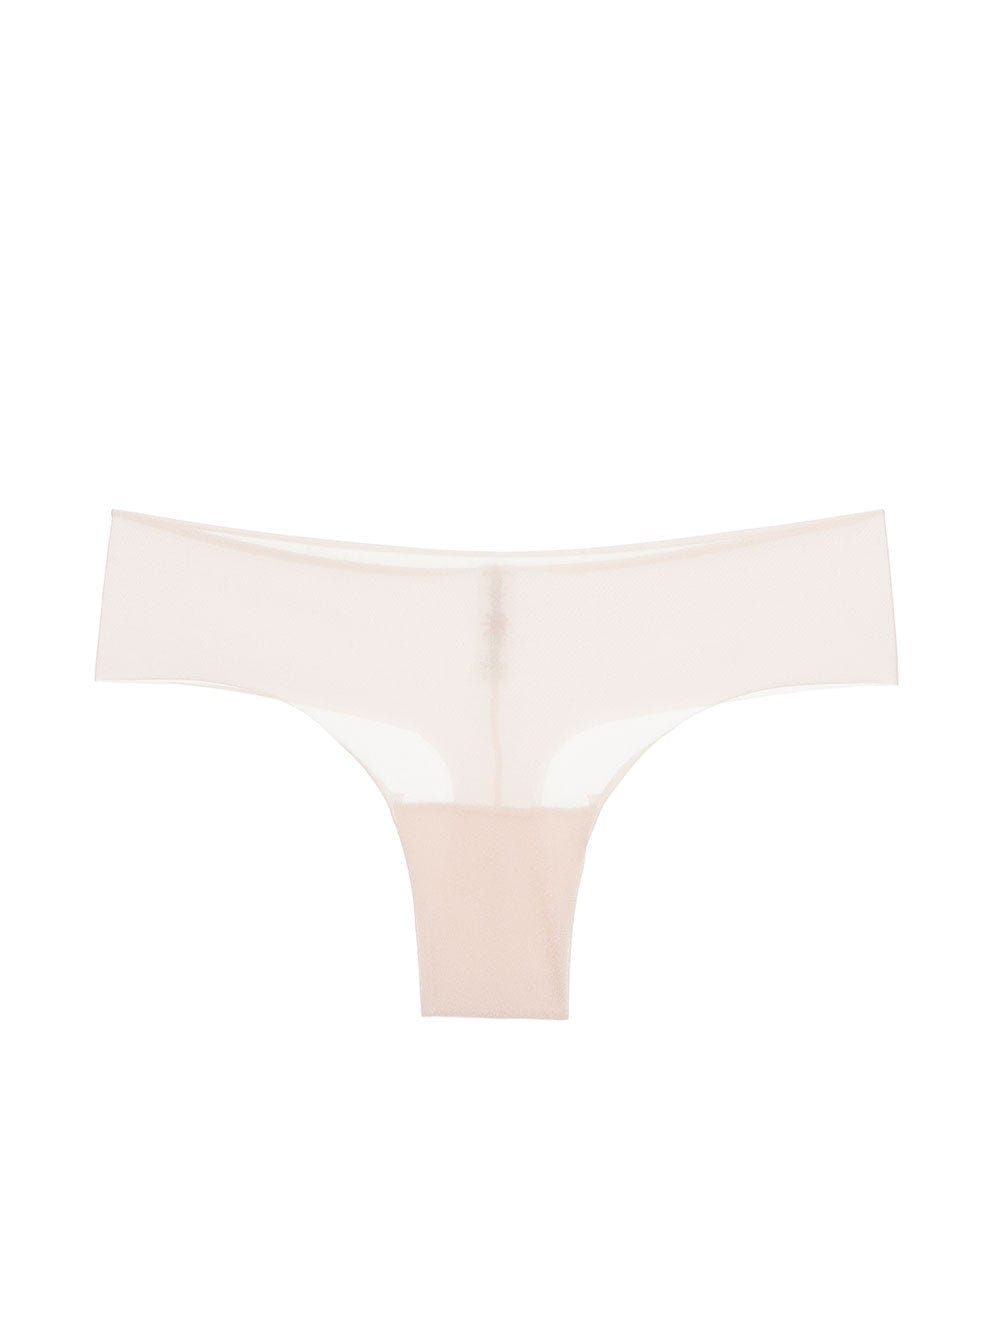 Cosabella Thongs Nude Rose / S/M Aire Thong - Nude Rose